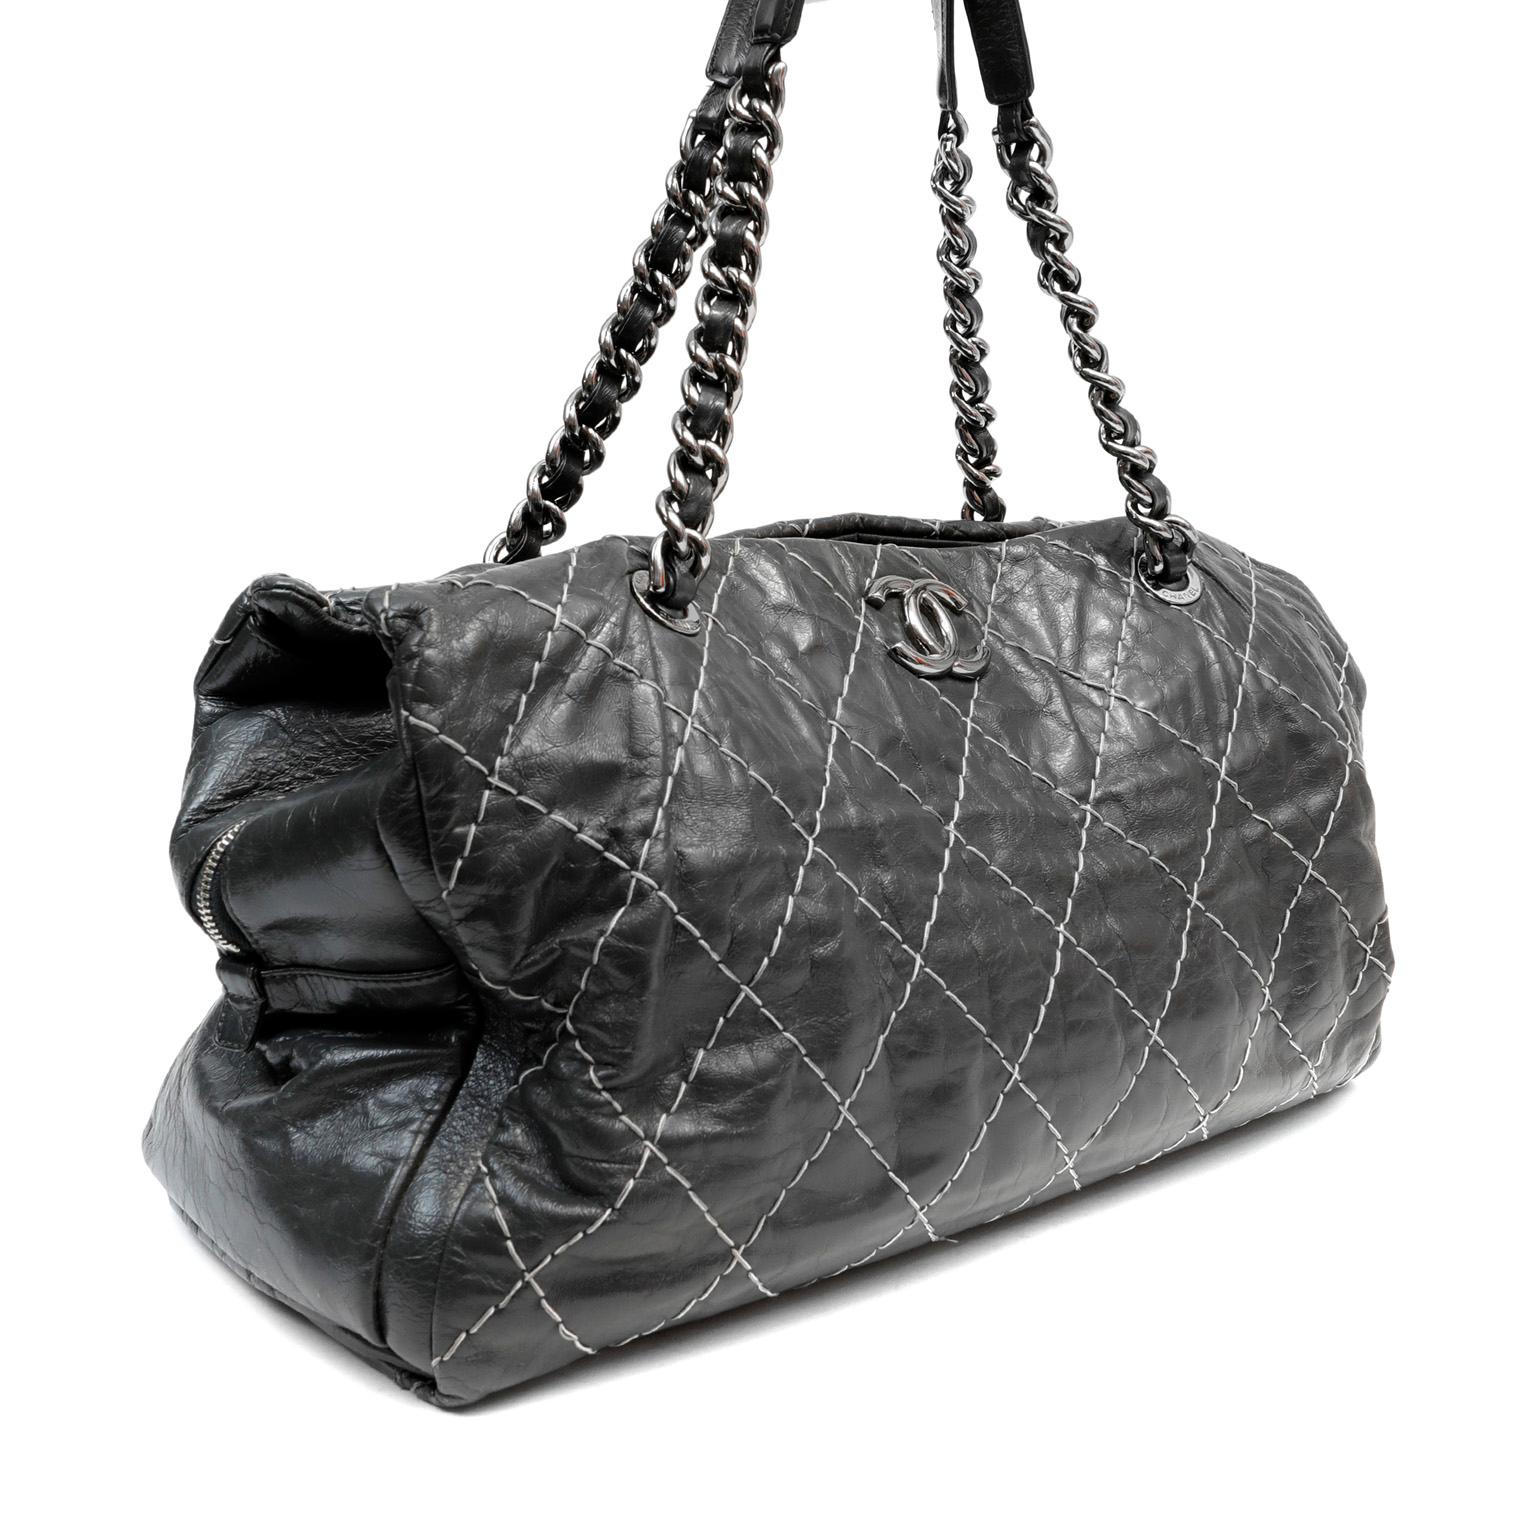 This authentic Chanel Slate Topstitched Distressed Leather Large Tote is in pristine condition.  Internationally distressed dark slate leather is topstitched in signature Chanel diamond pattern.  Spacious and double-sided style with silver tone